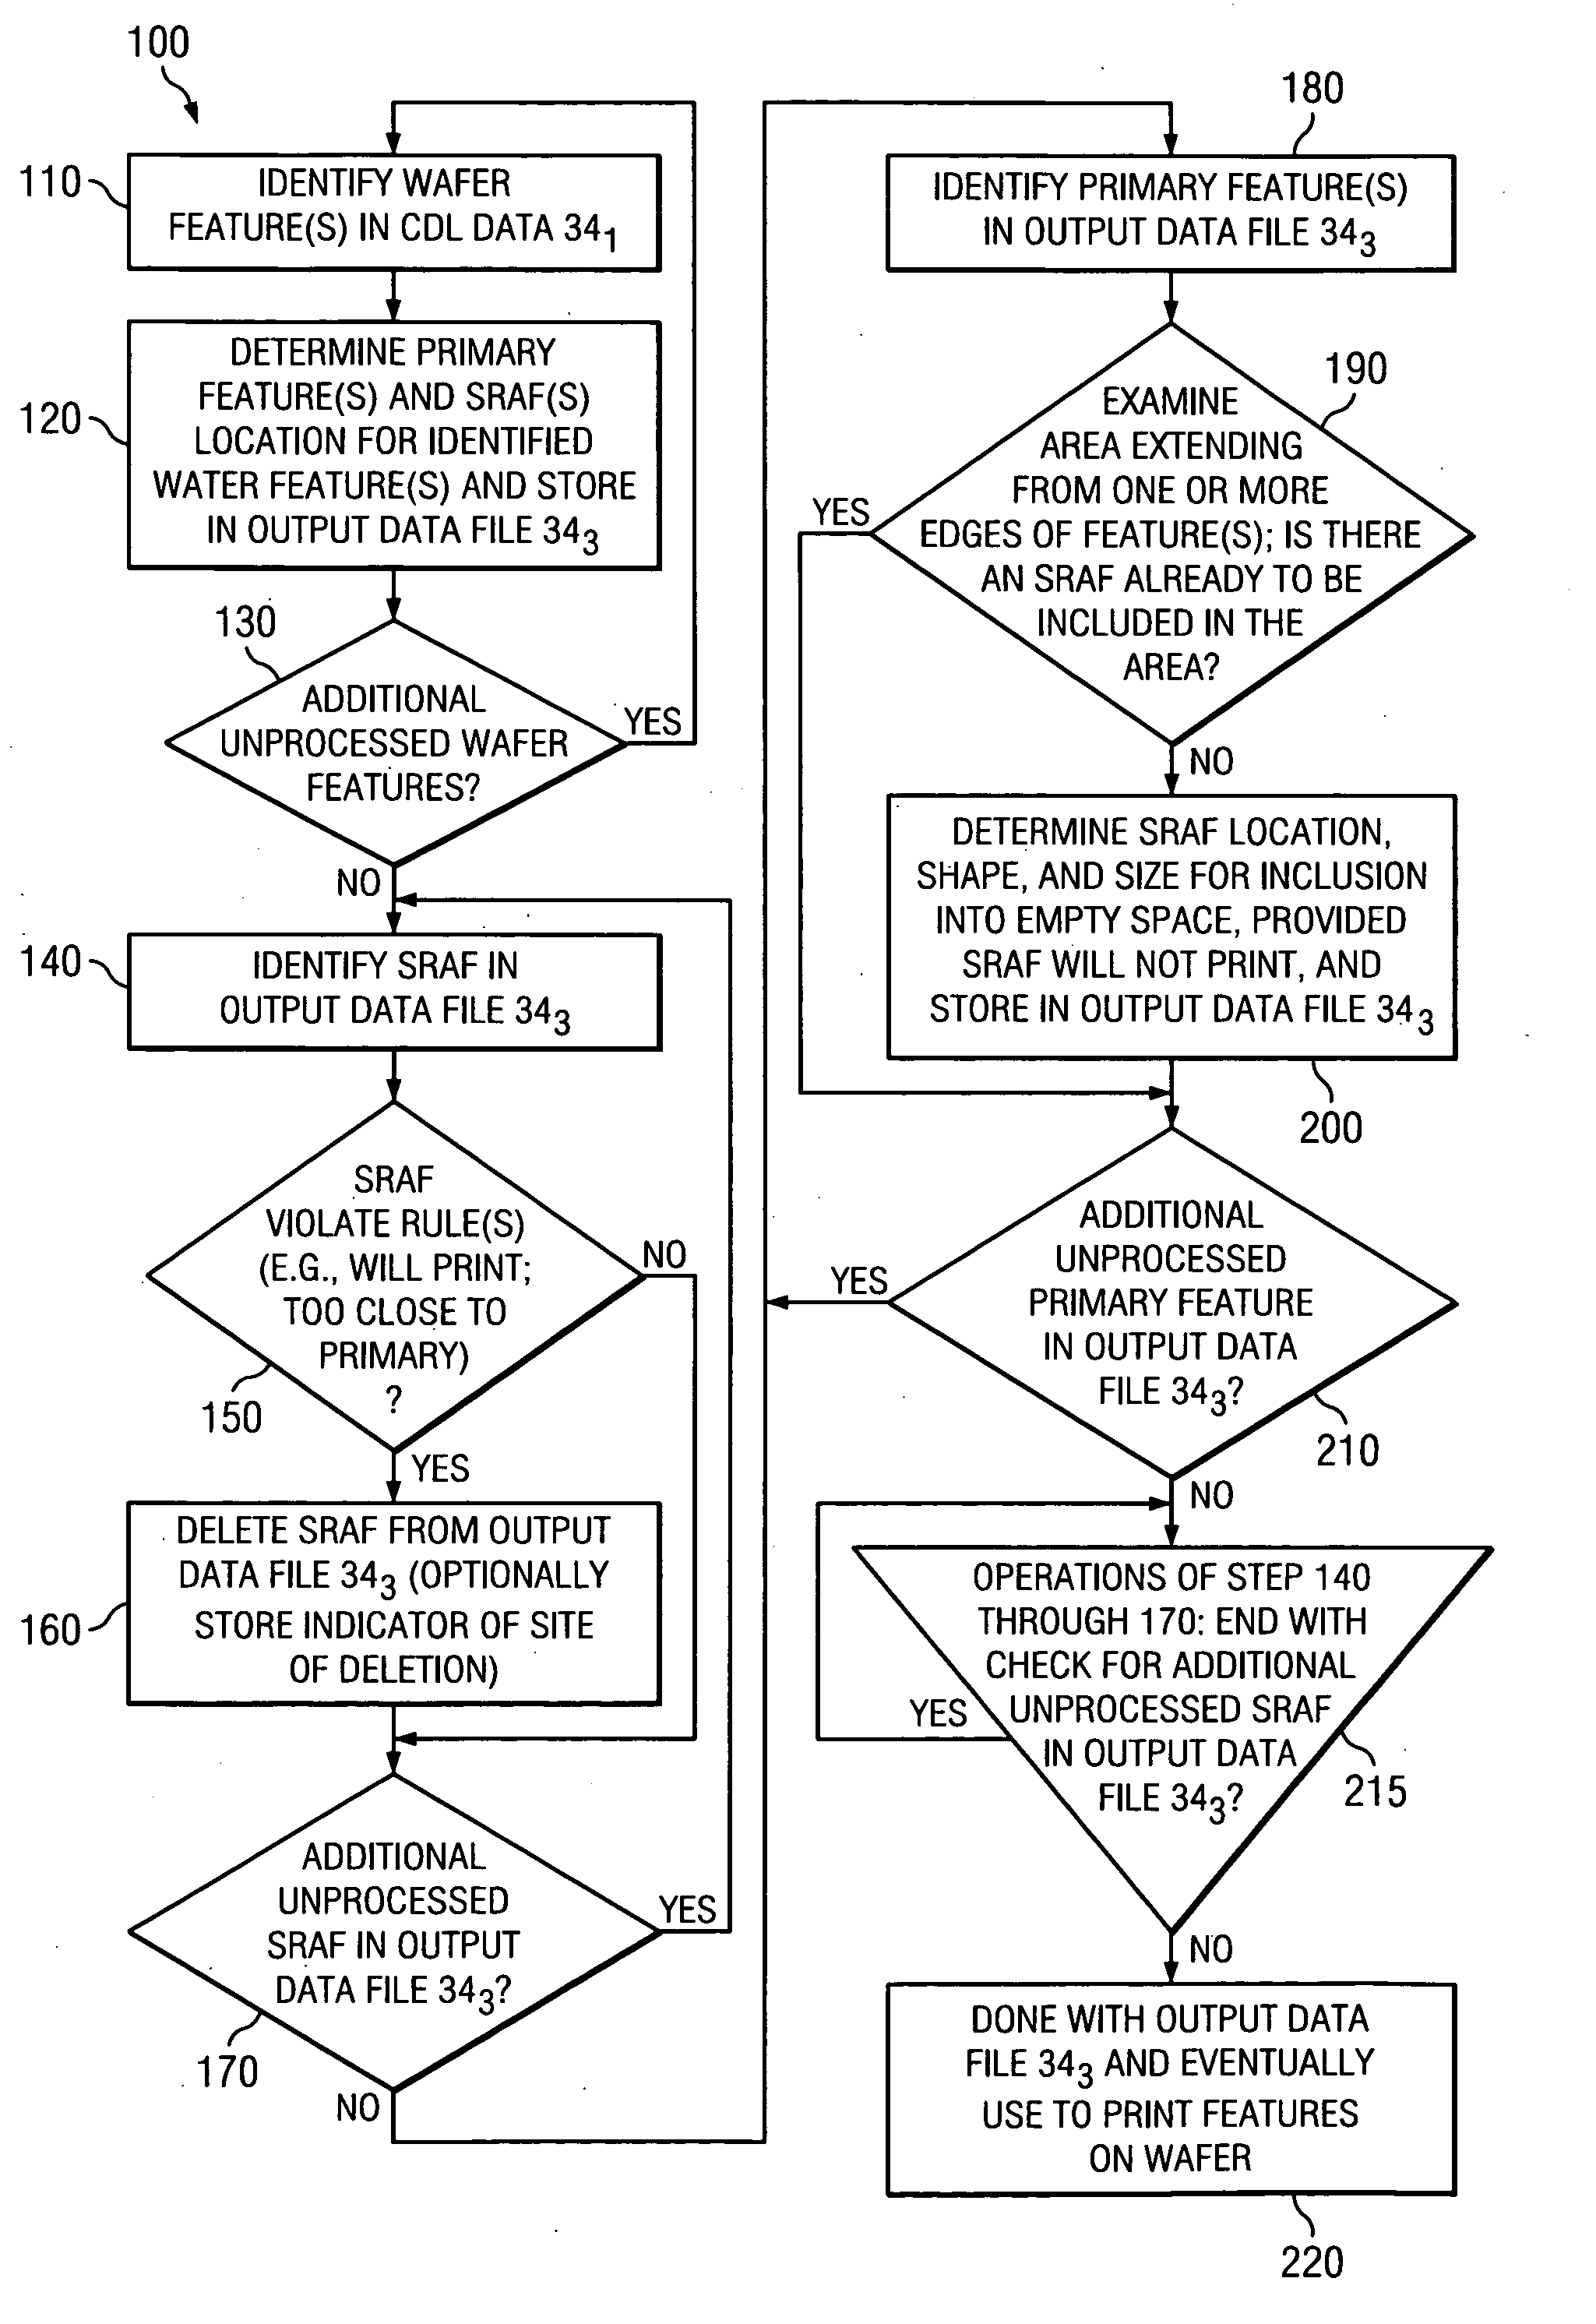 Method of inclusion of sub-resolution assist feature(s)